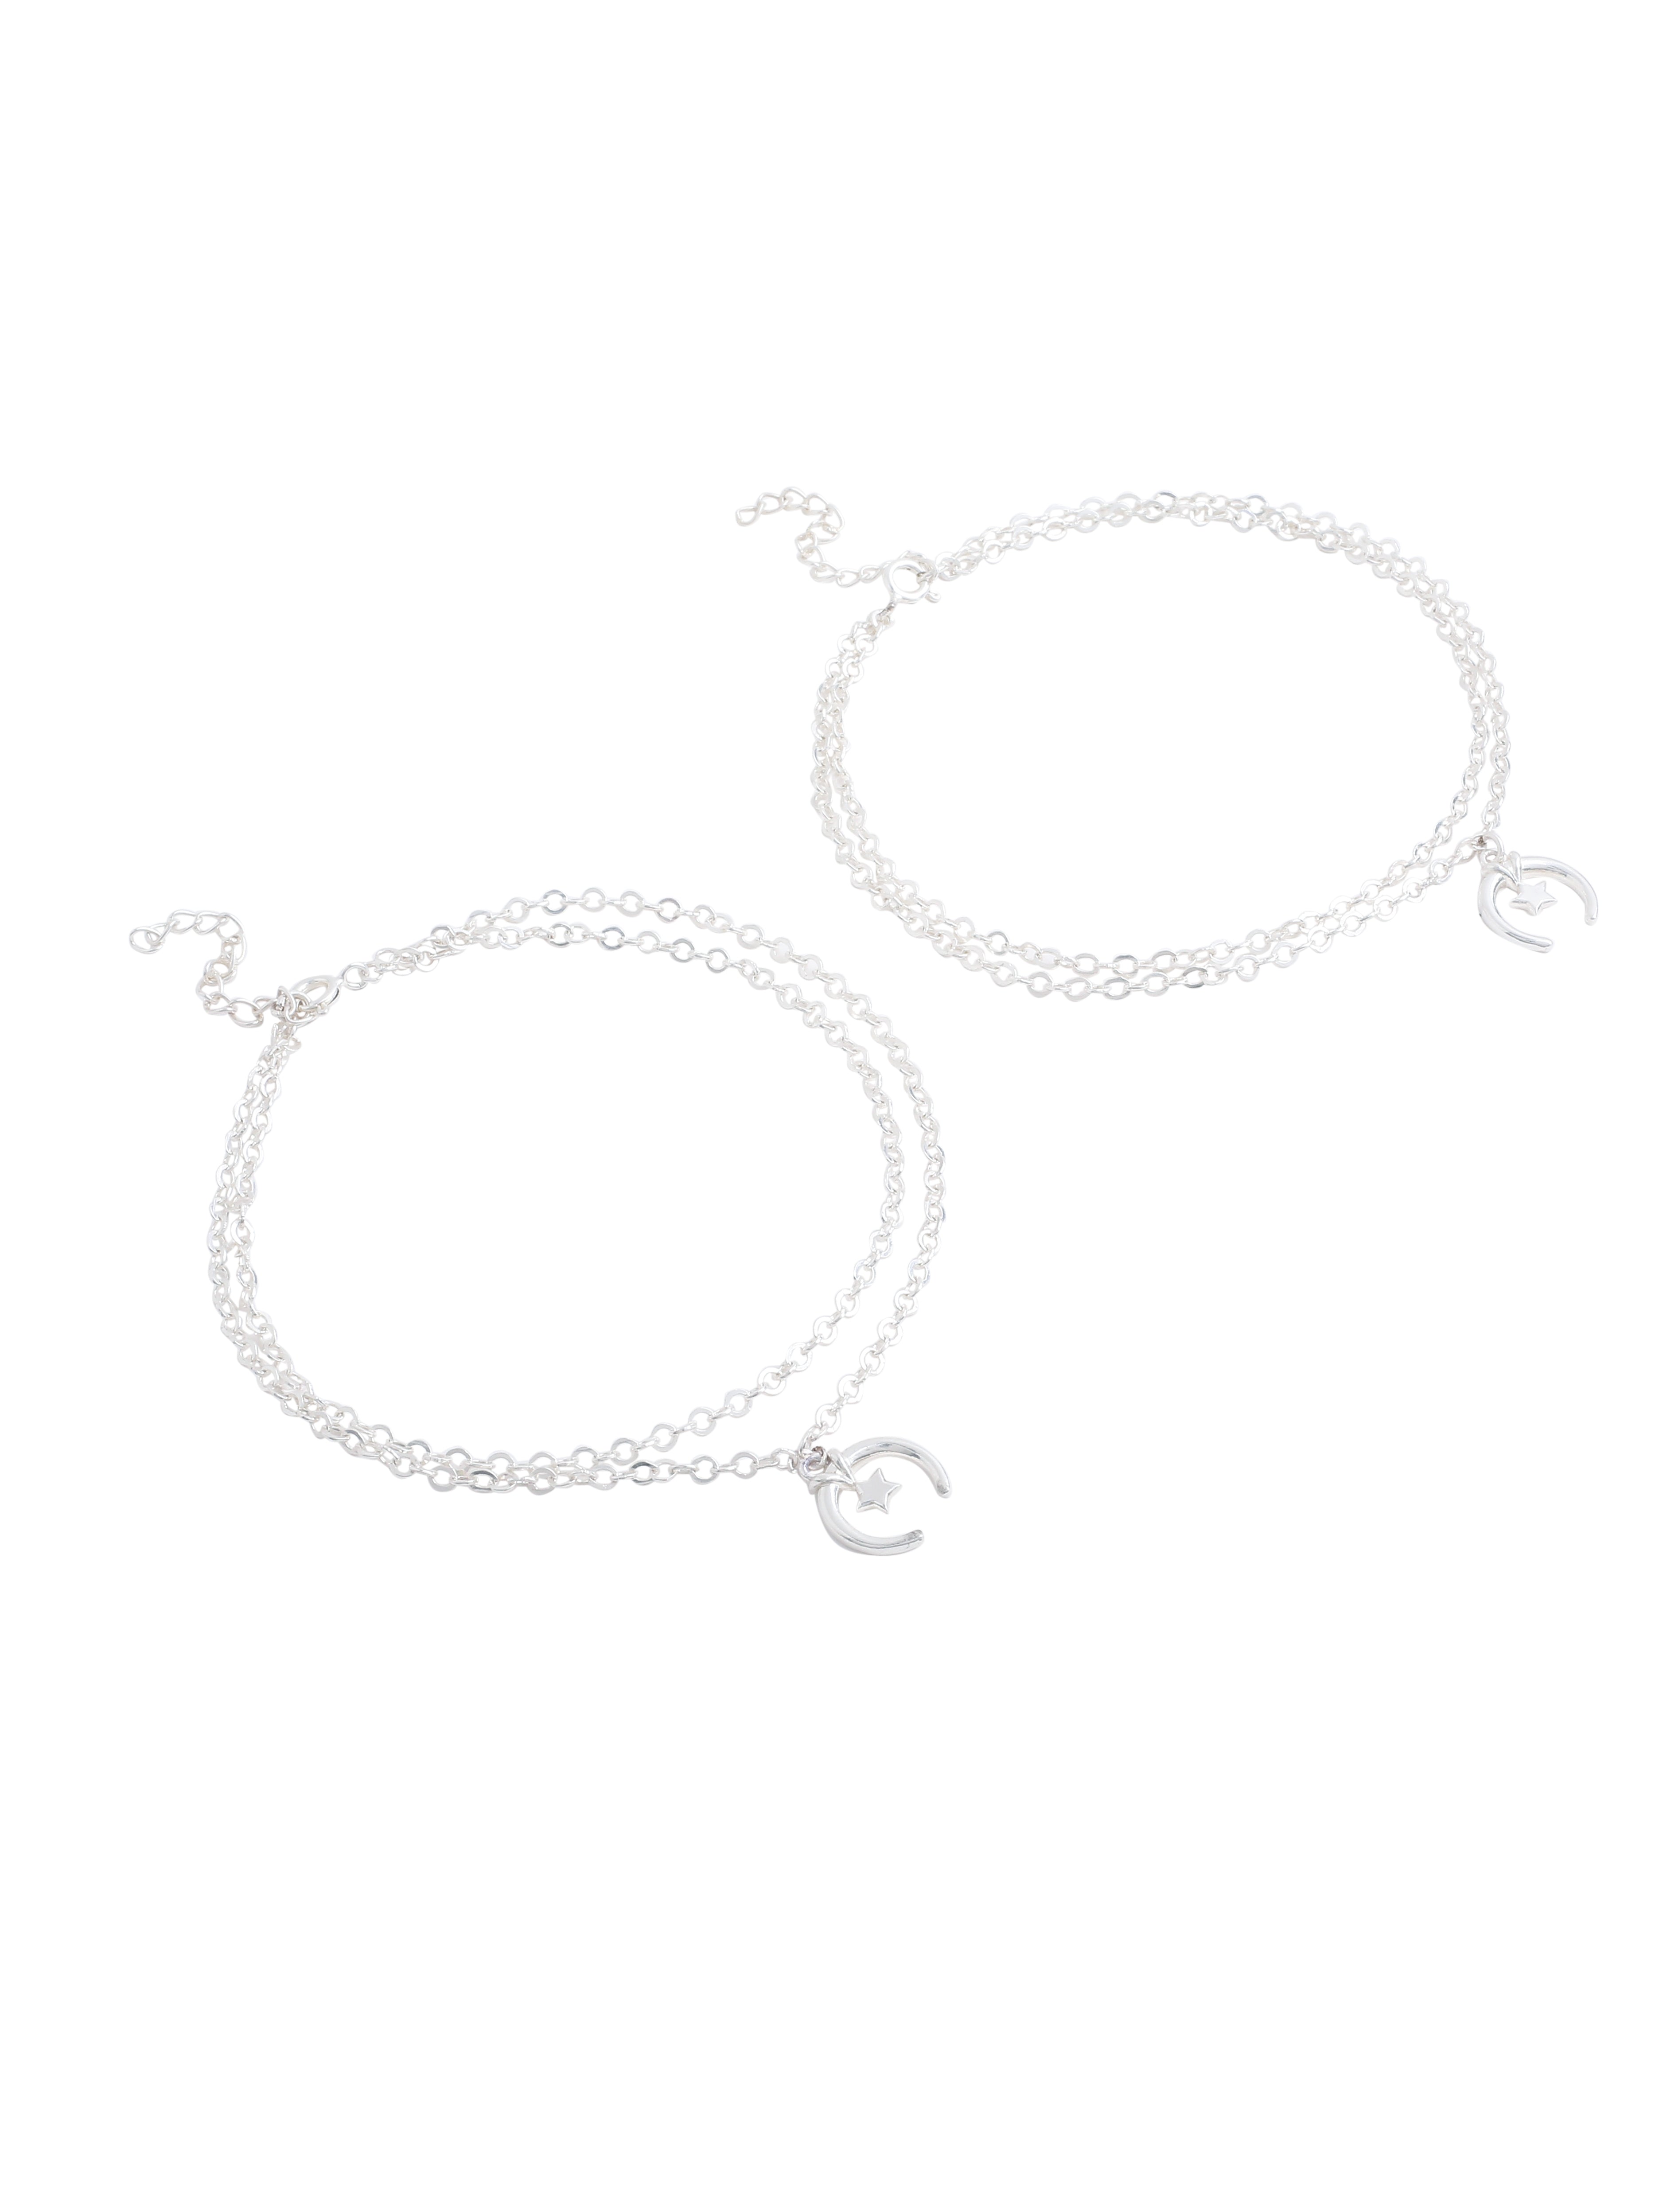 Celestial Charm: Moon and Star Sterling Silver Anklet